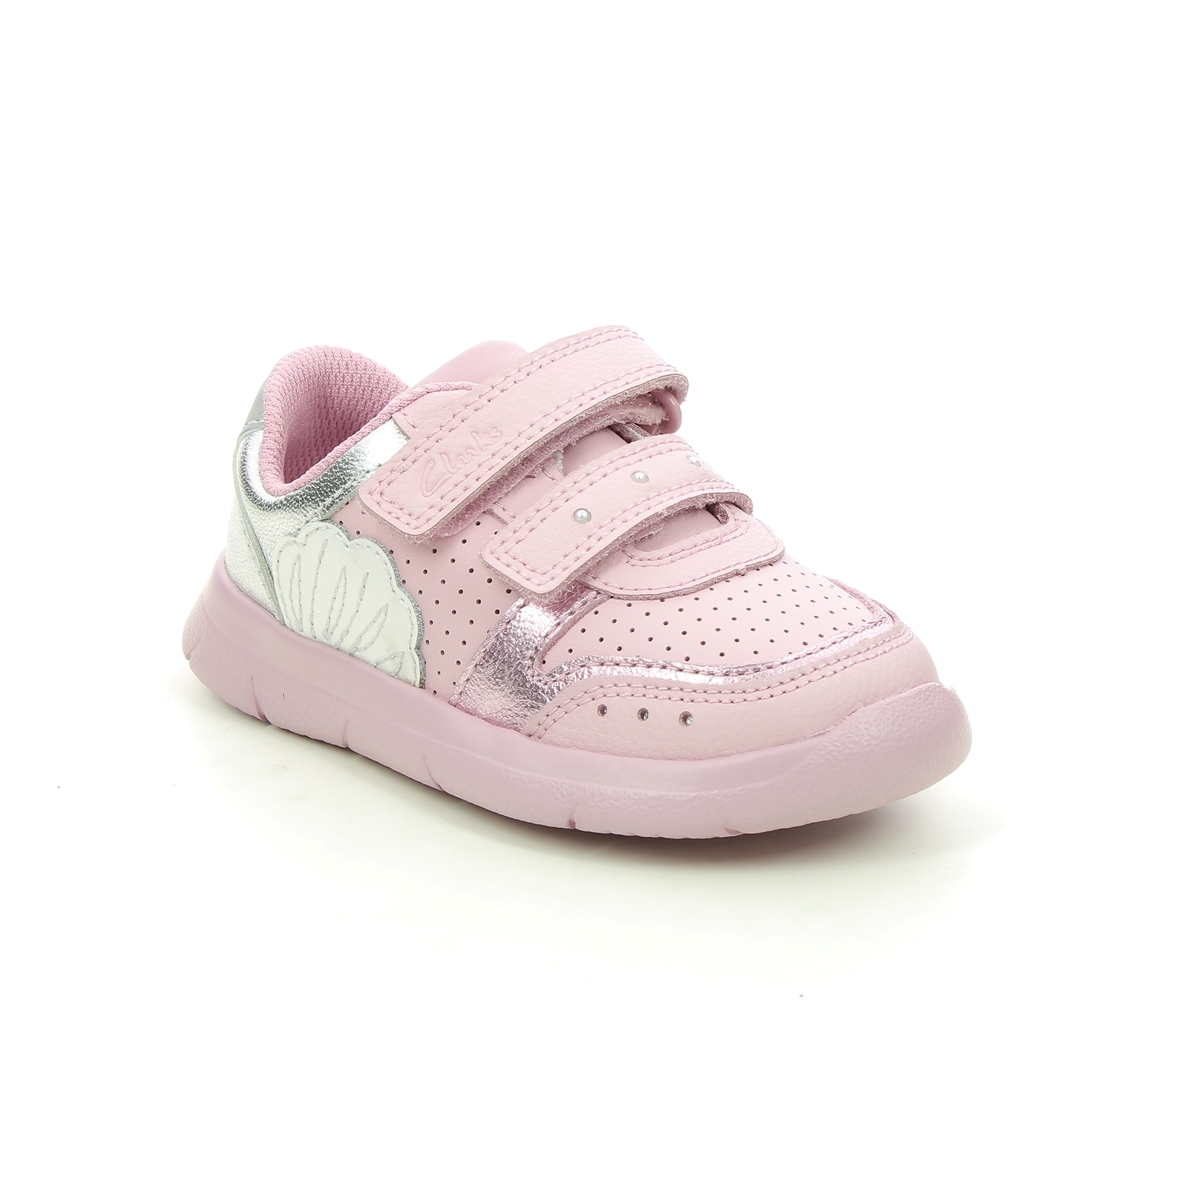 Clarks Ath Shell T Pink Leather Kids Toddler Girls Trainers 588097G In Size 5 In Plain Pink Leather G Width Fitting For kids